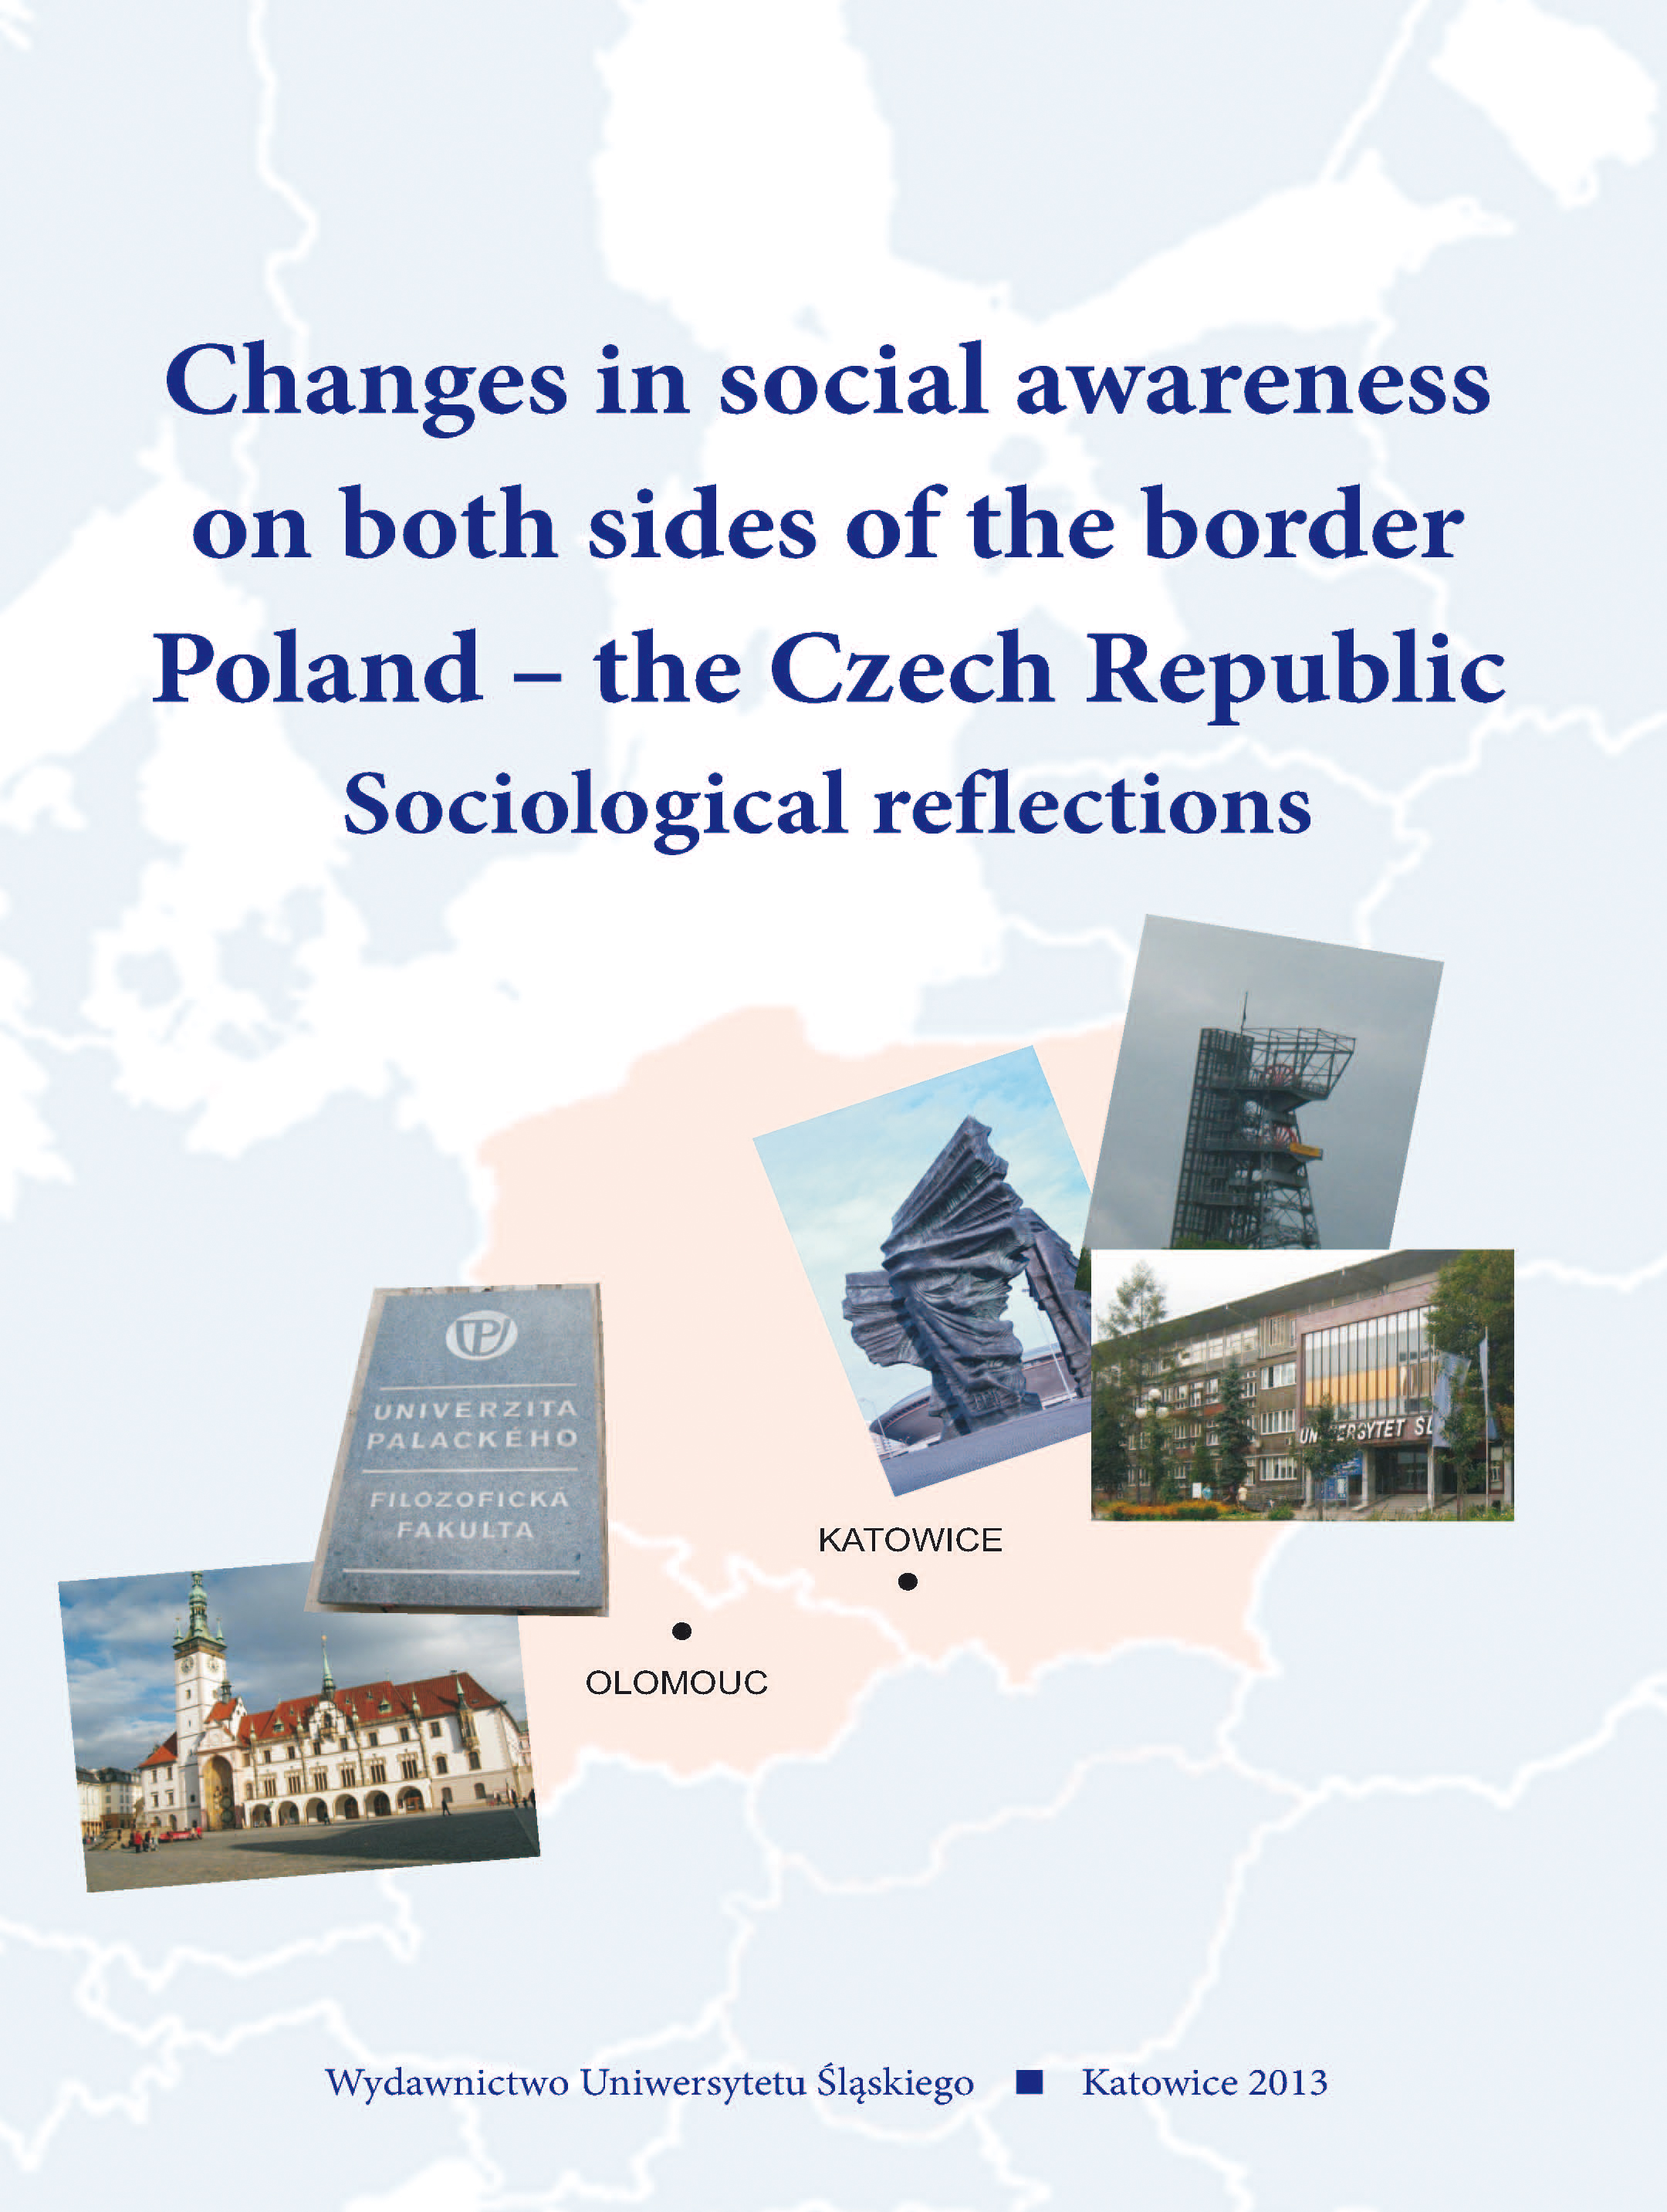 Changes in social awareness on both sides of the border. Poland – the Czech Republic. Sociological reflections